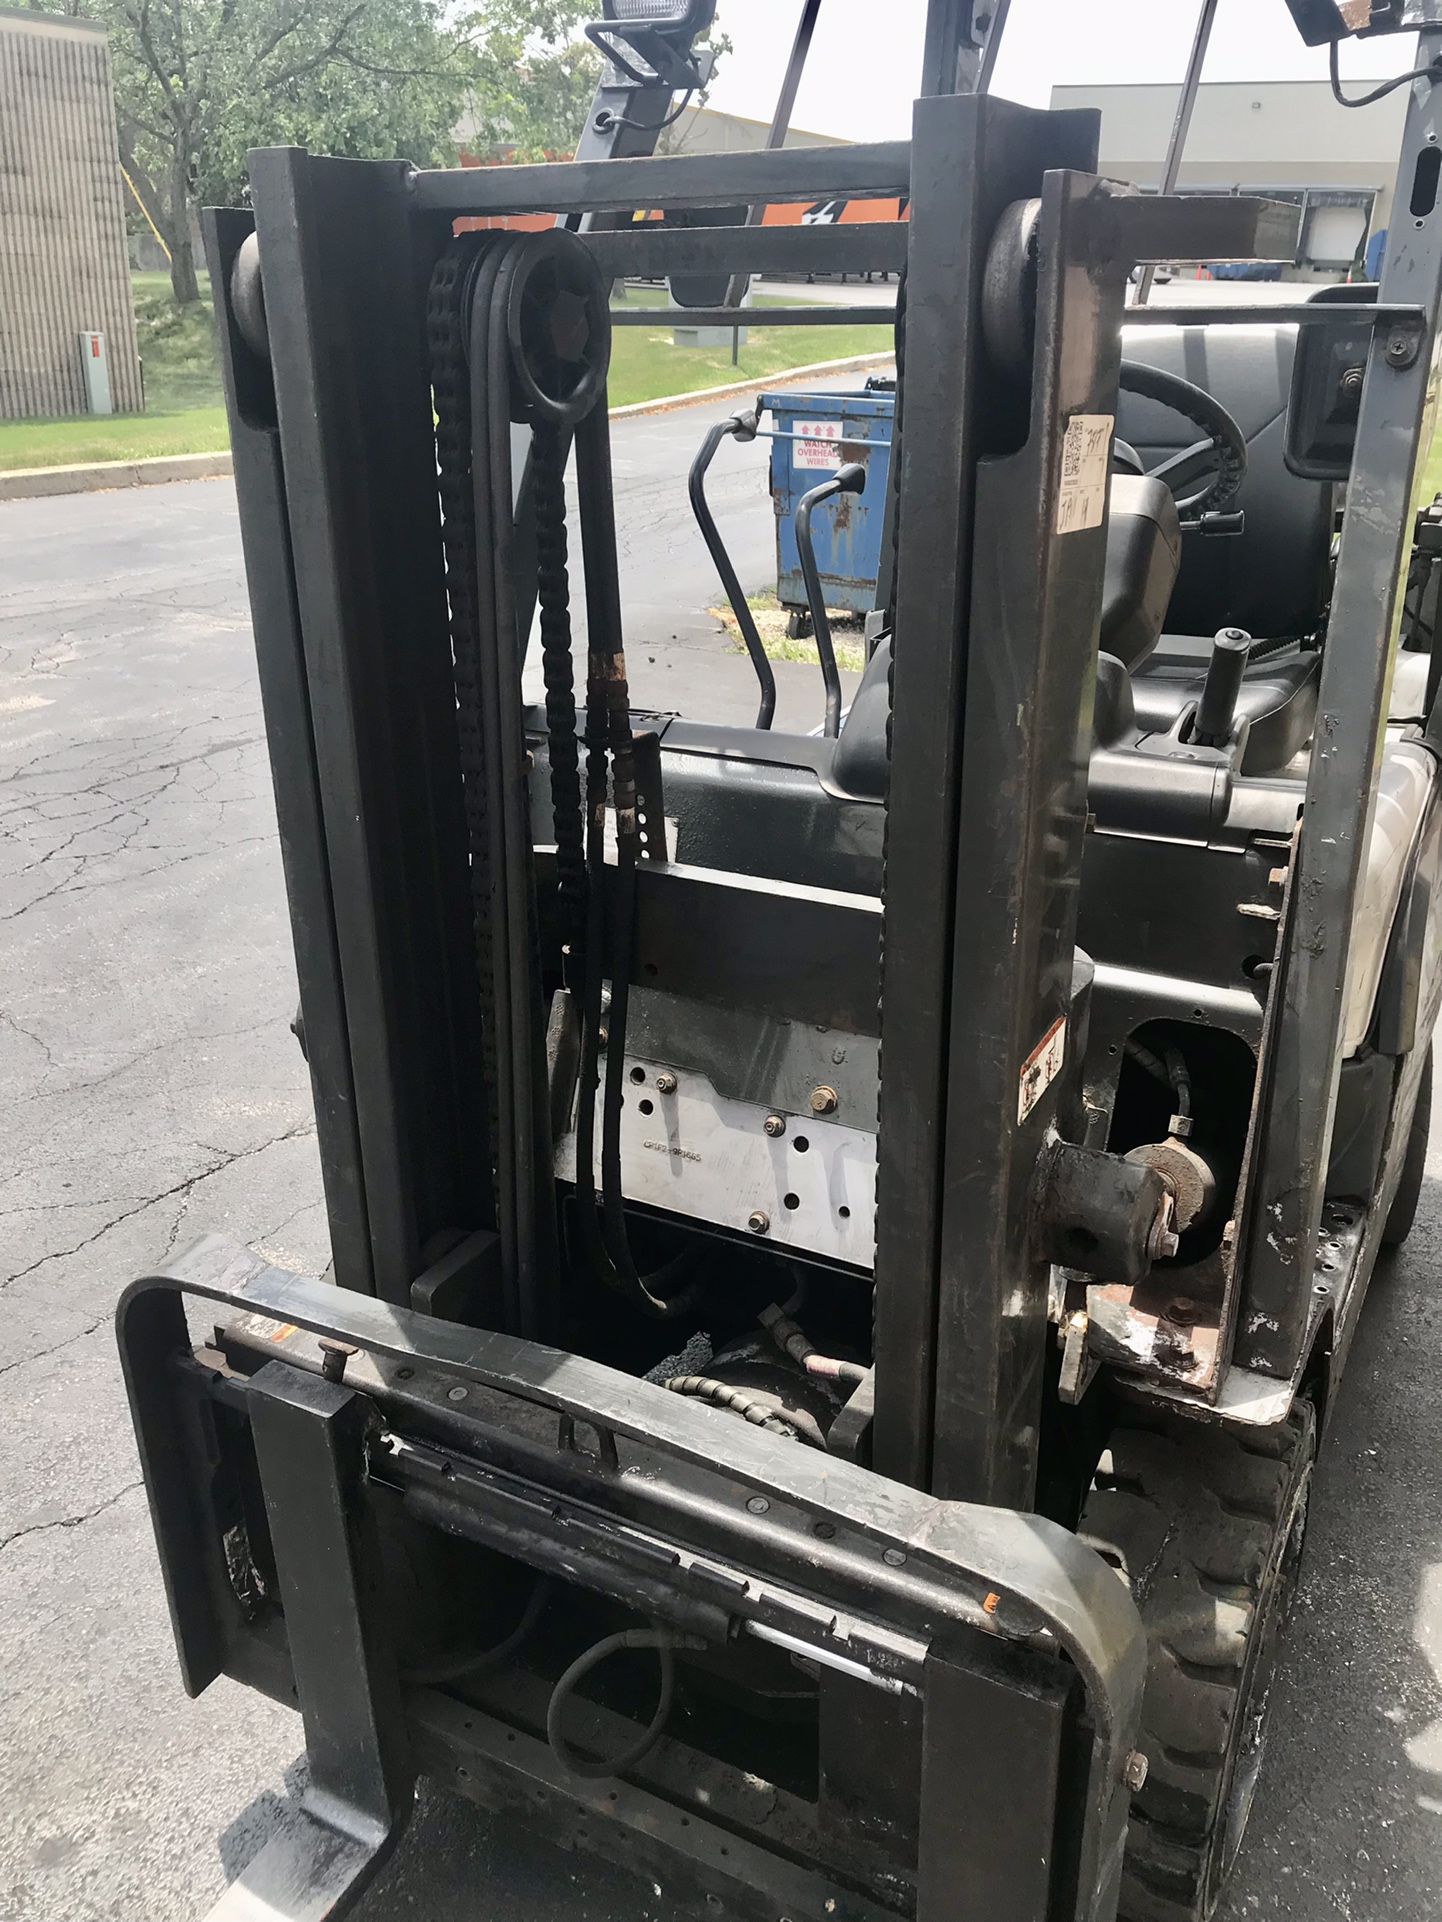 2014 Nissan Forklift In Perfectly Working Condition. Double Stage. Side Shift. Propane. No Leaks, No Issues.